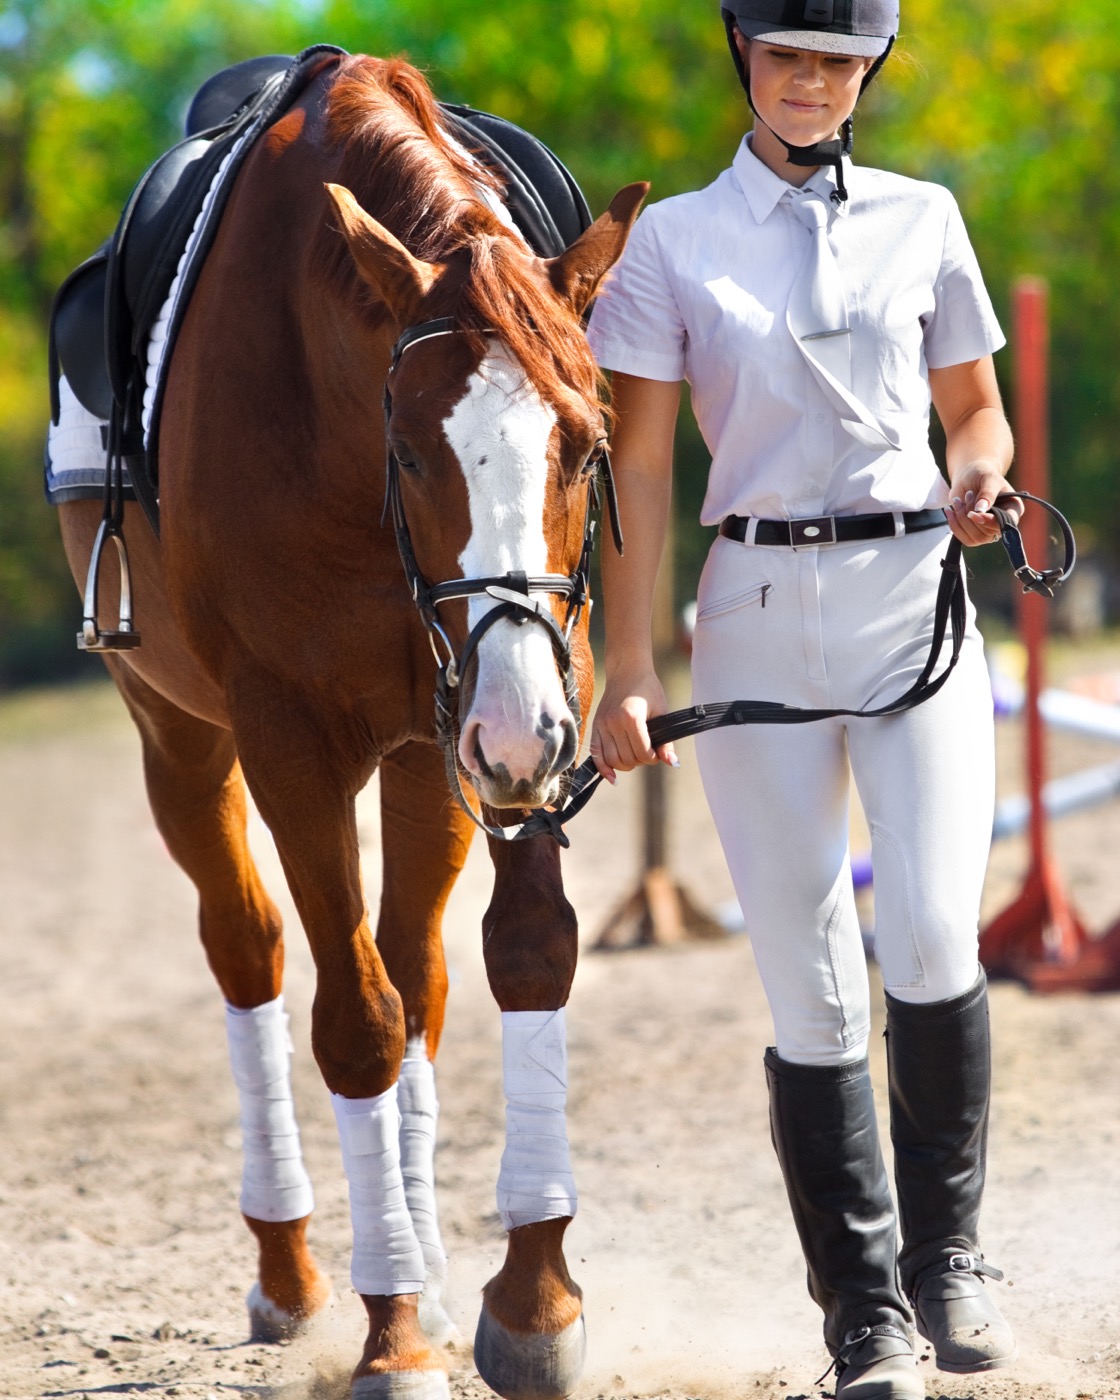 Experience excellence in horse training and coaching